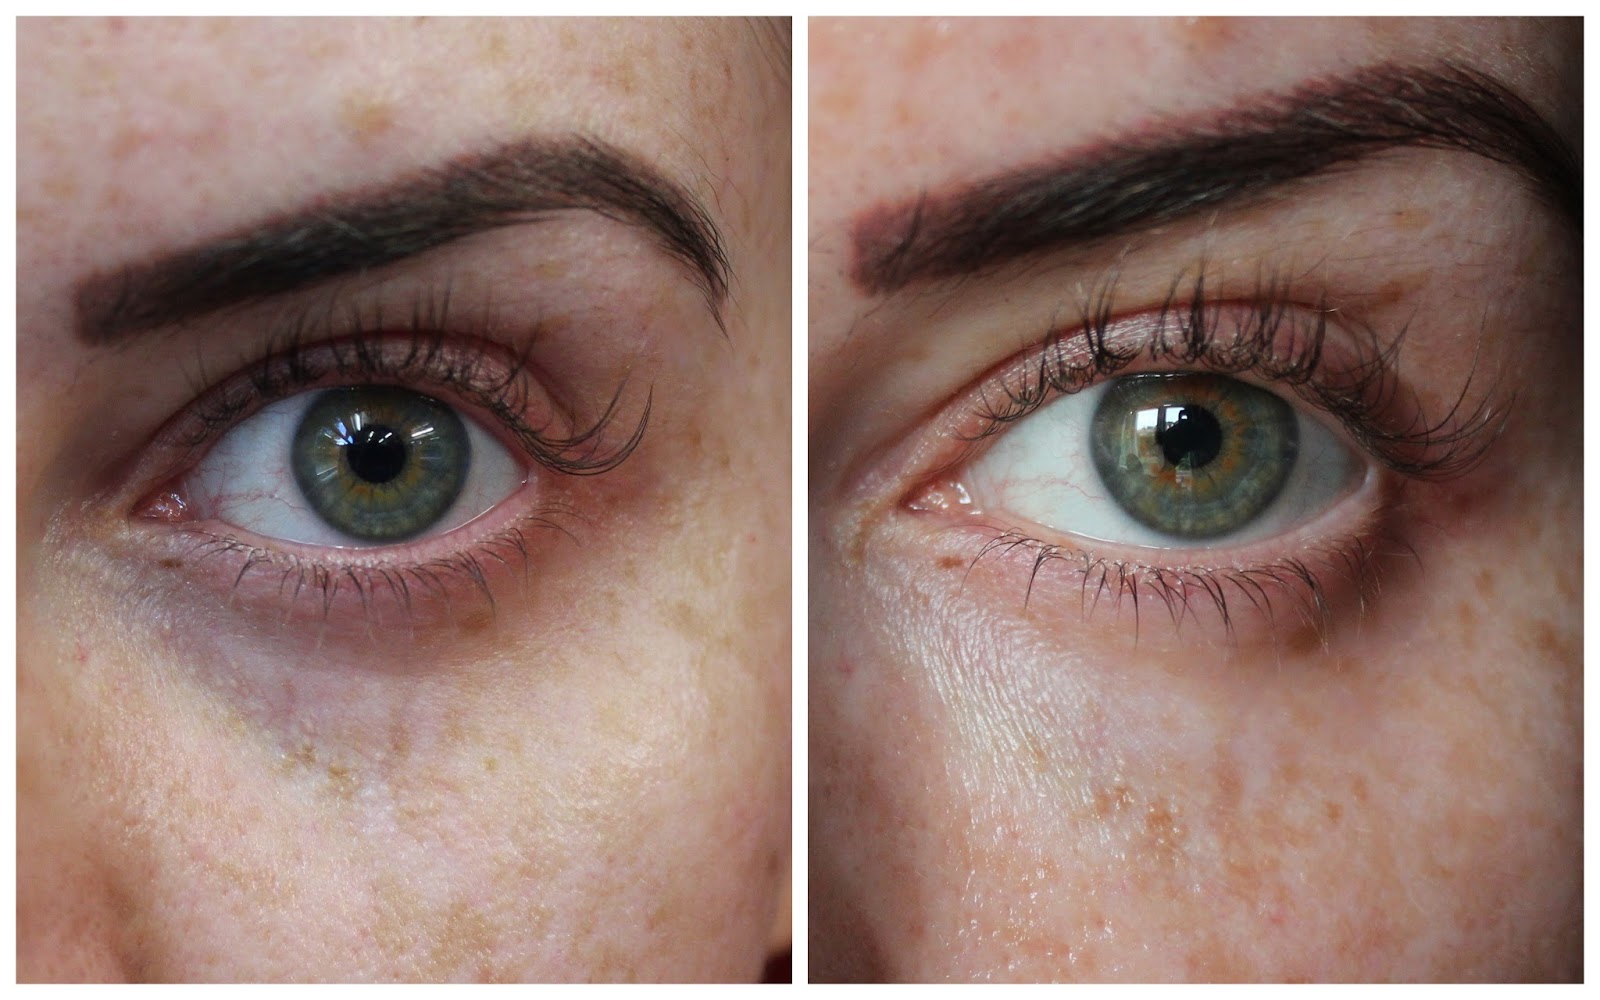 Tear Trough Filler Before And After At The Milo Clinic By Dr Milojevic (Non-surgical eye bag removal)